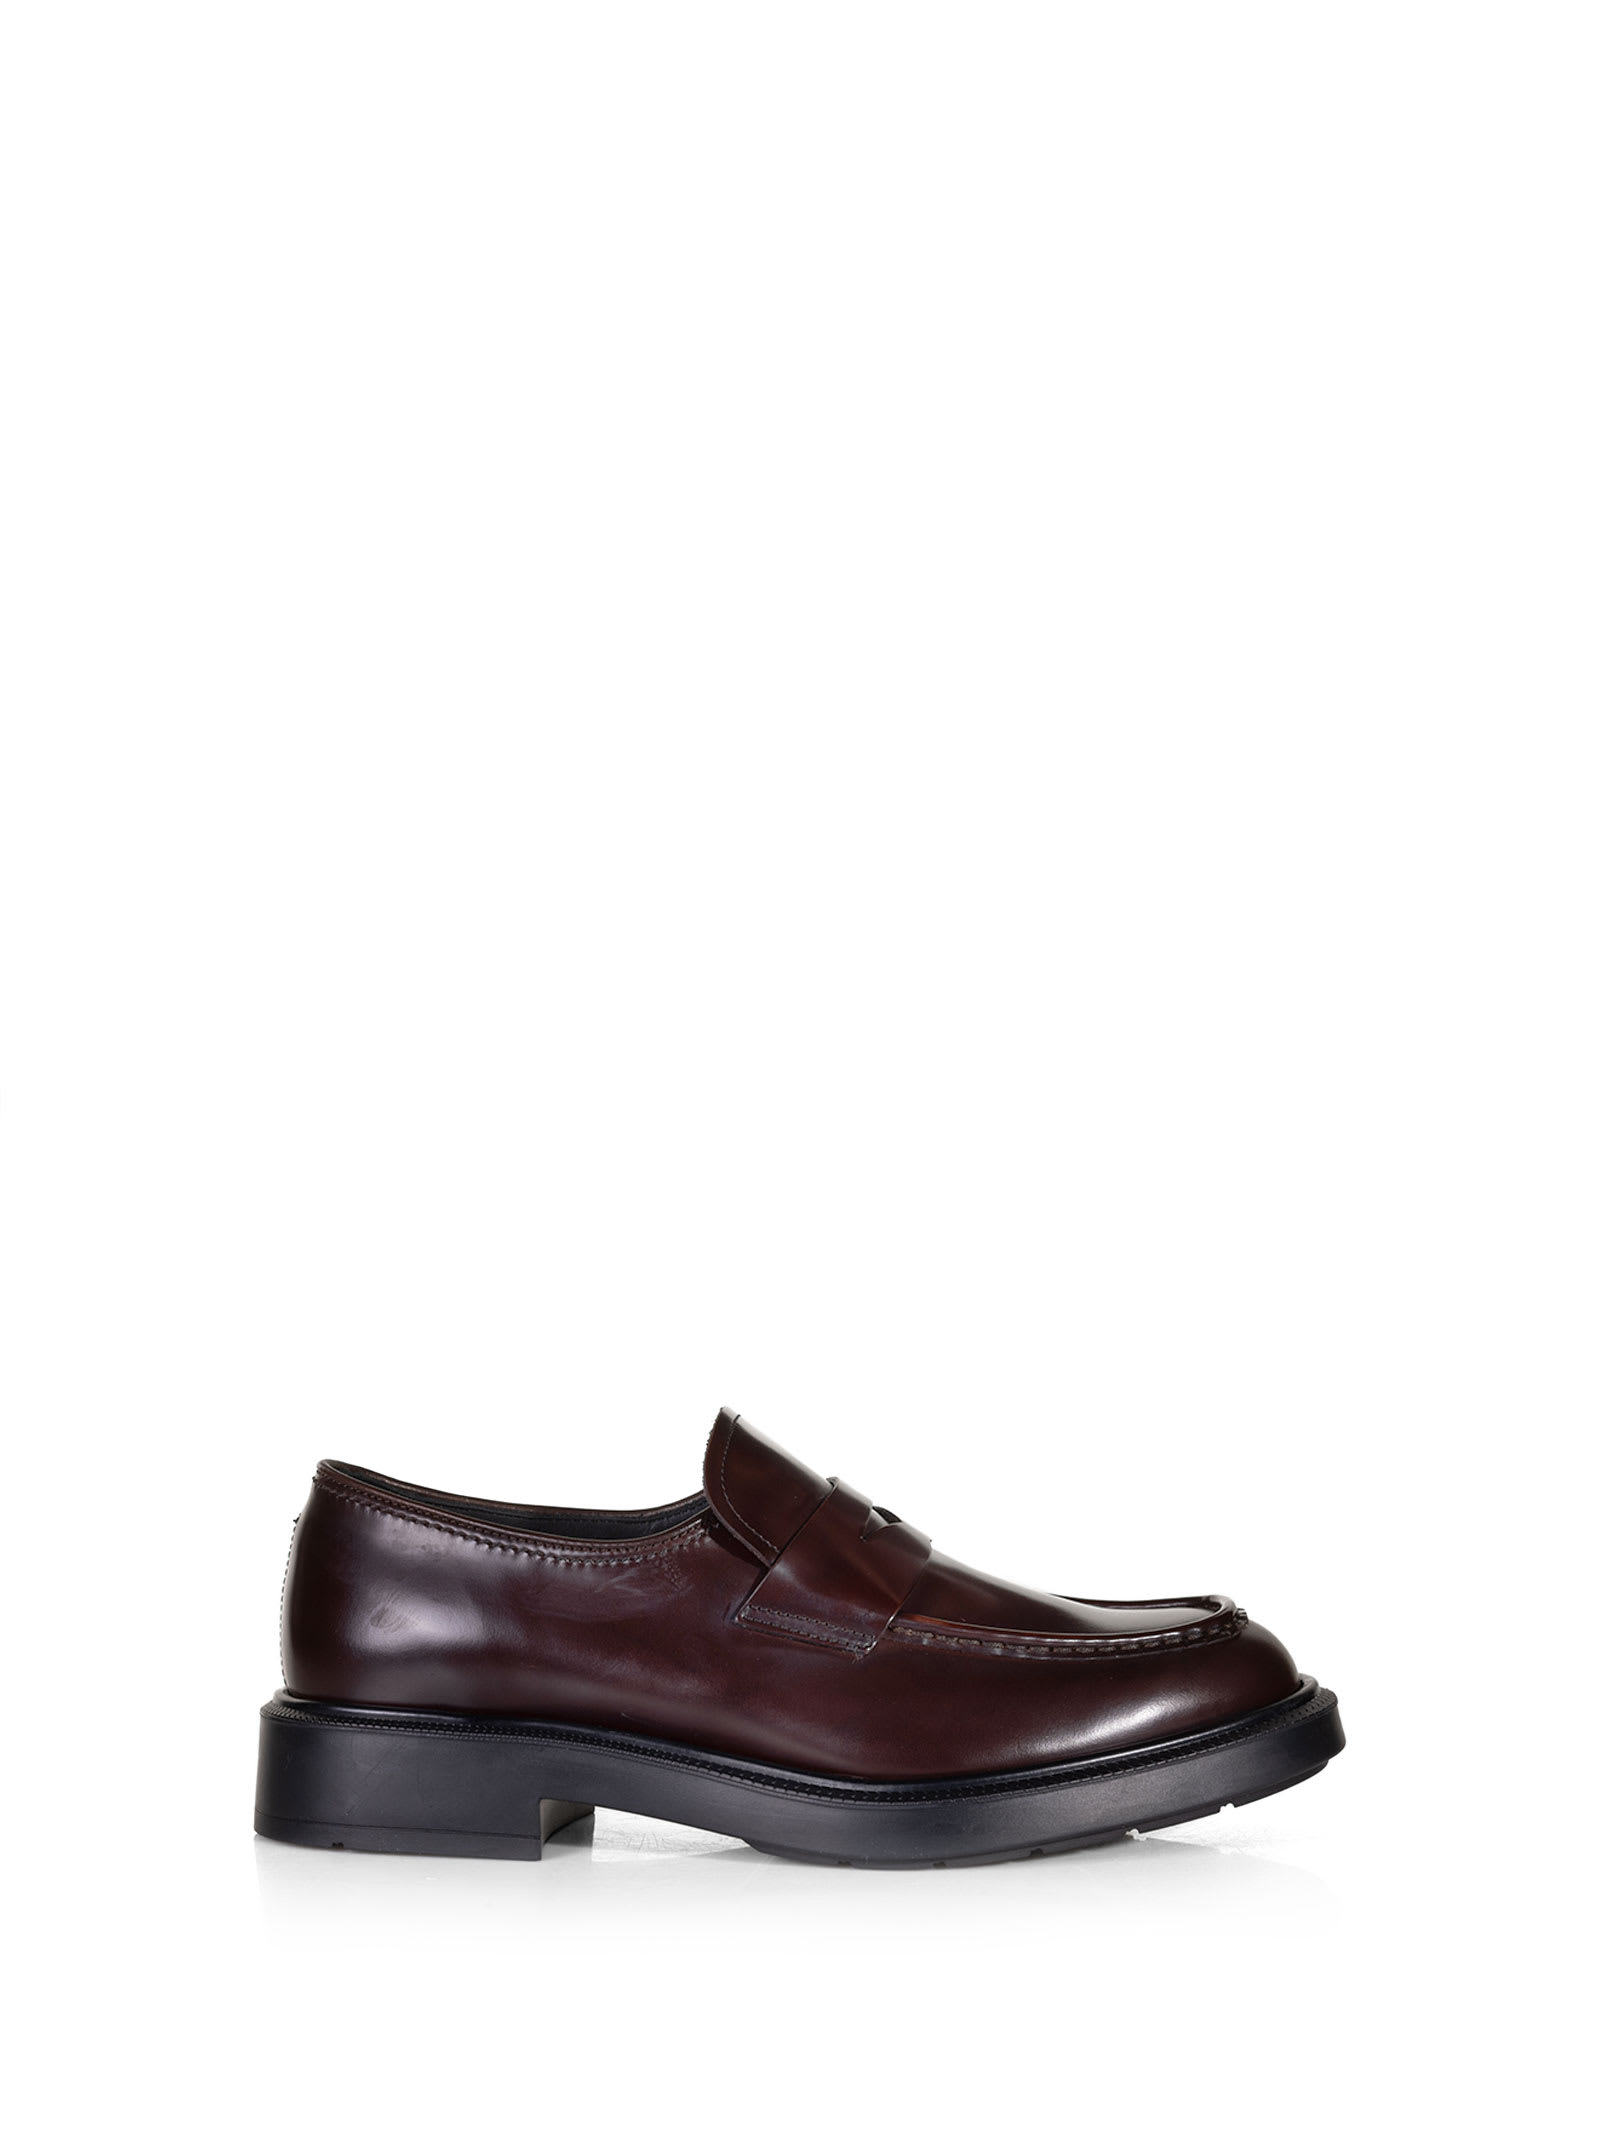 Fratelli Rossetti One Brushed Leather Loafer